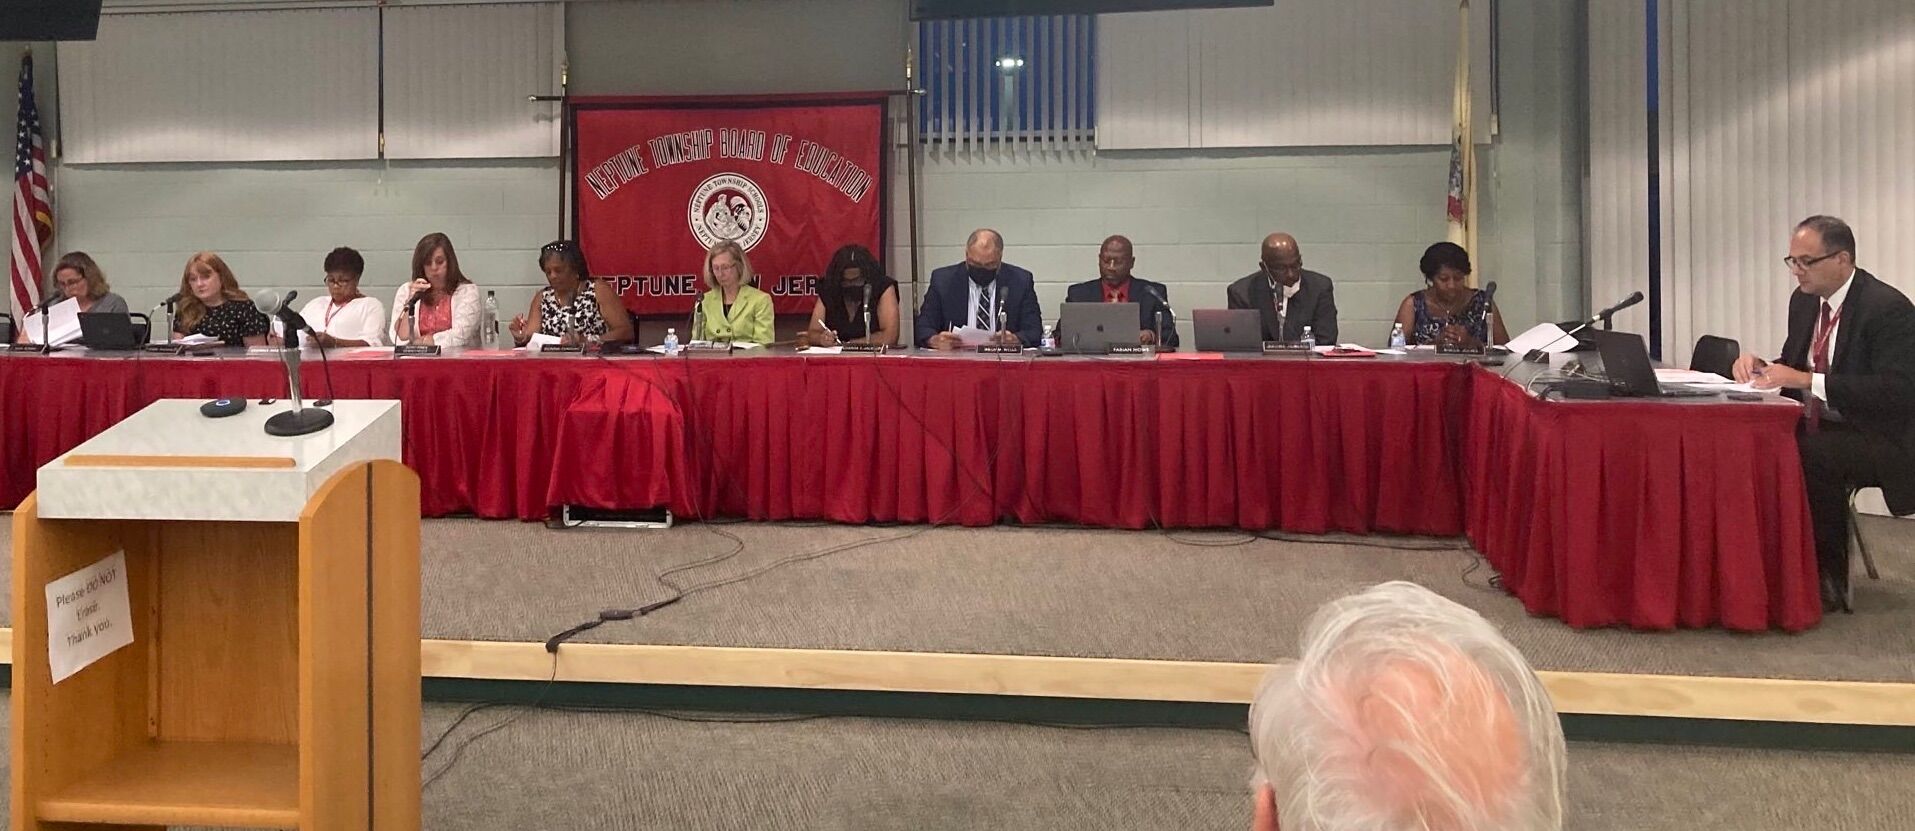 The Neptune Township Board of Education held a meeting to discuss Michael Smurro's reinstatement